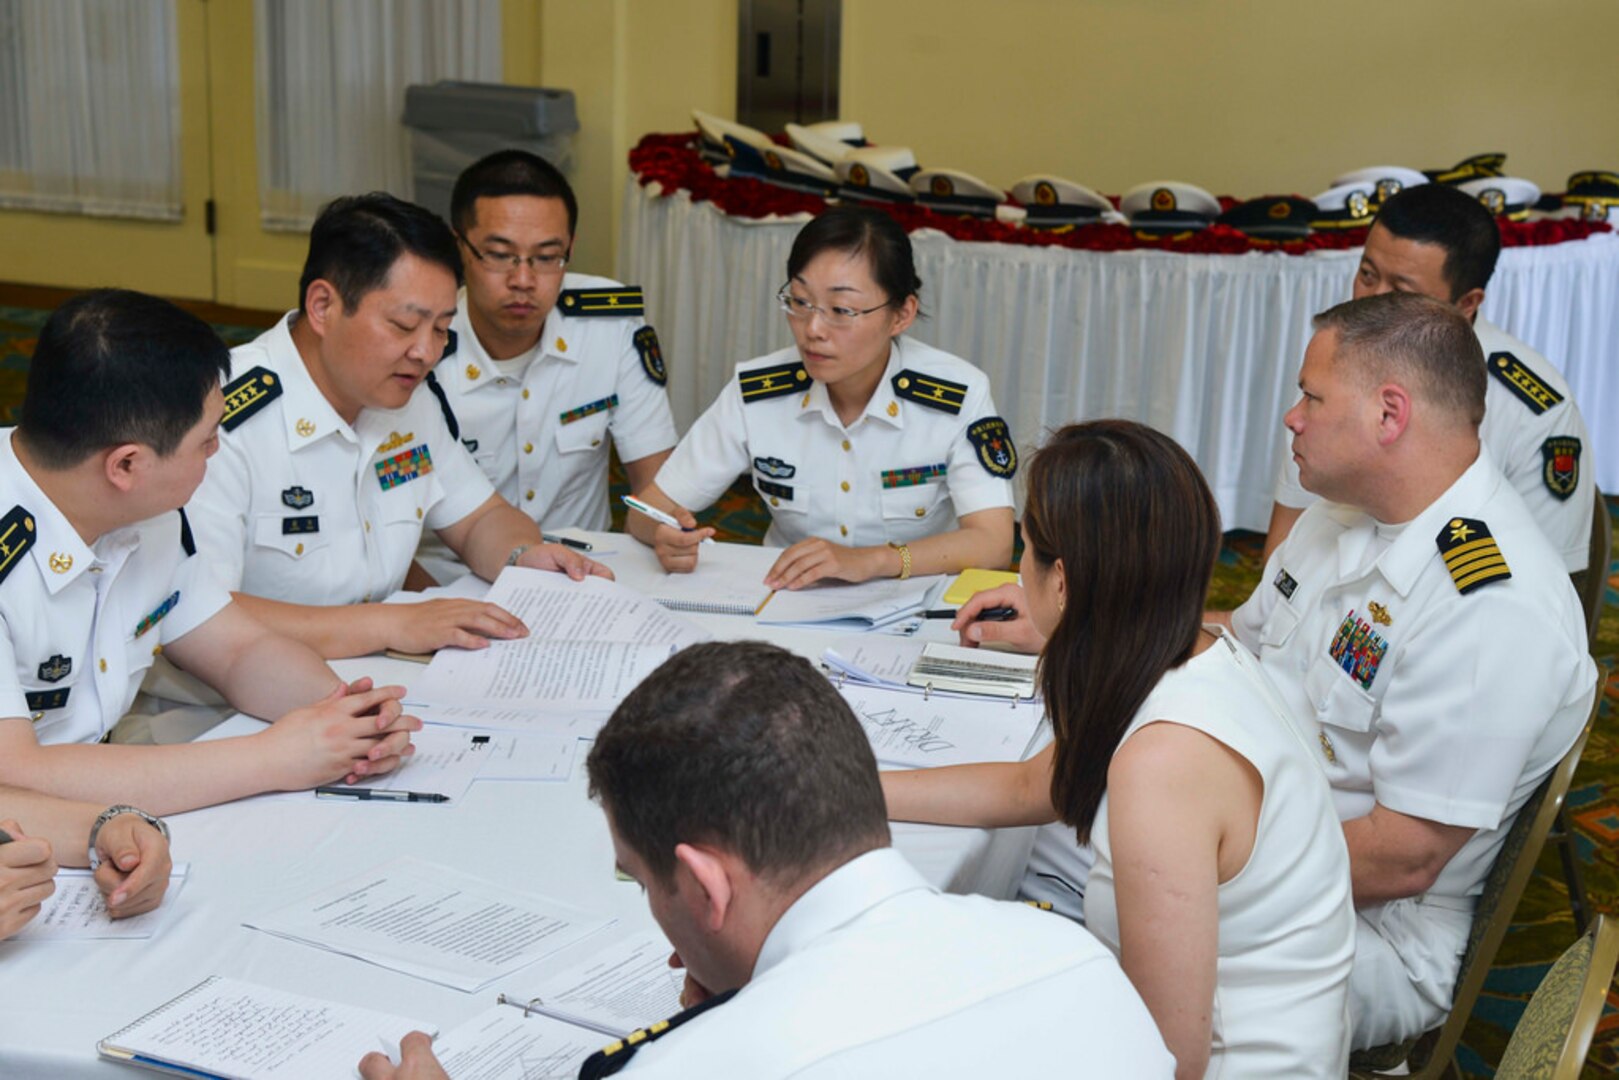 PEARL HARBOR (May 25, 2016) - Military representatives from U.S. Pacific Fleet (PACFLT), U.S. Pacific Air Forces and the People's Republic of China (PRC) People's Liberation Army Navy and Air Force met for the Military Maritime Consultative Agreement (MMCA), from May 24-25, at Ford Island. The goal of the two-day talks was to strengthen ties through open communication between U.S. and PRC naval and air forces and to improve operational safety in the air and maritime environments. 